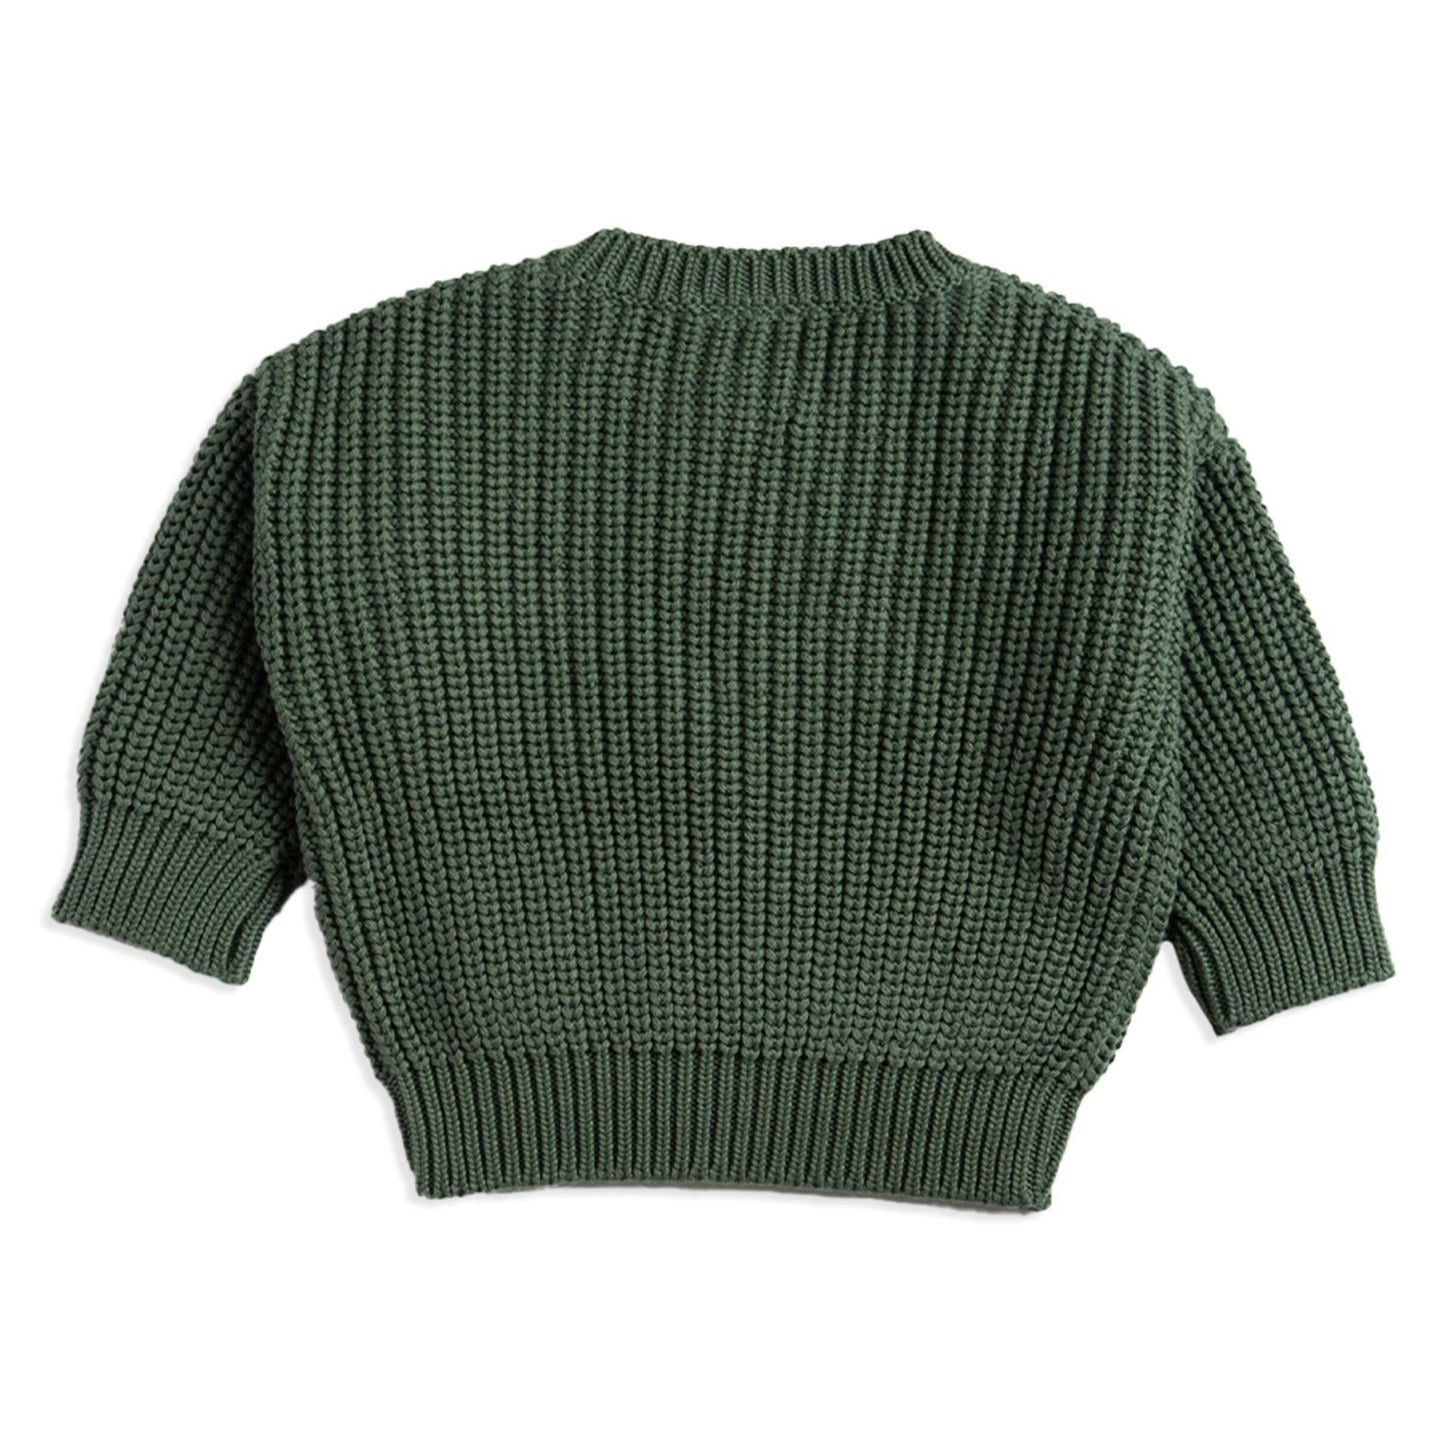 Tiny Twig Knitted Chunky Sweater - Agave